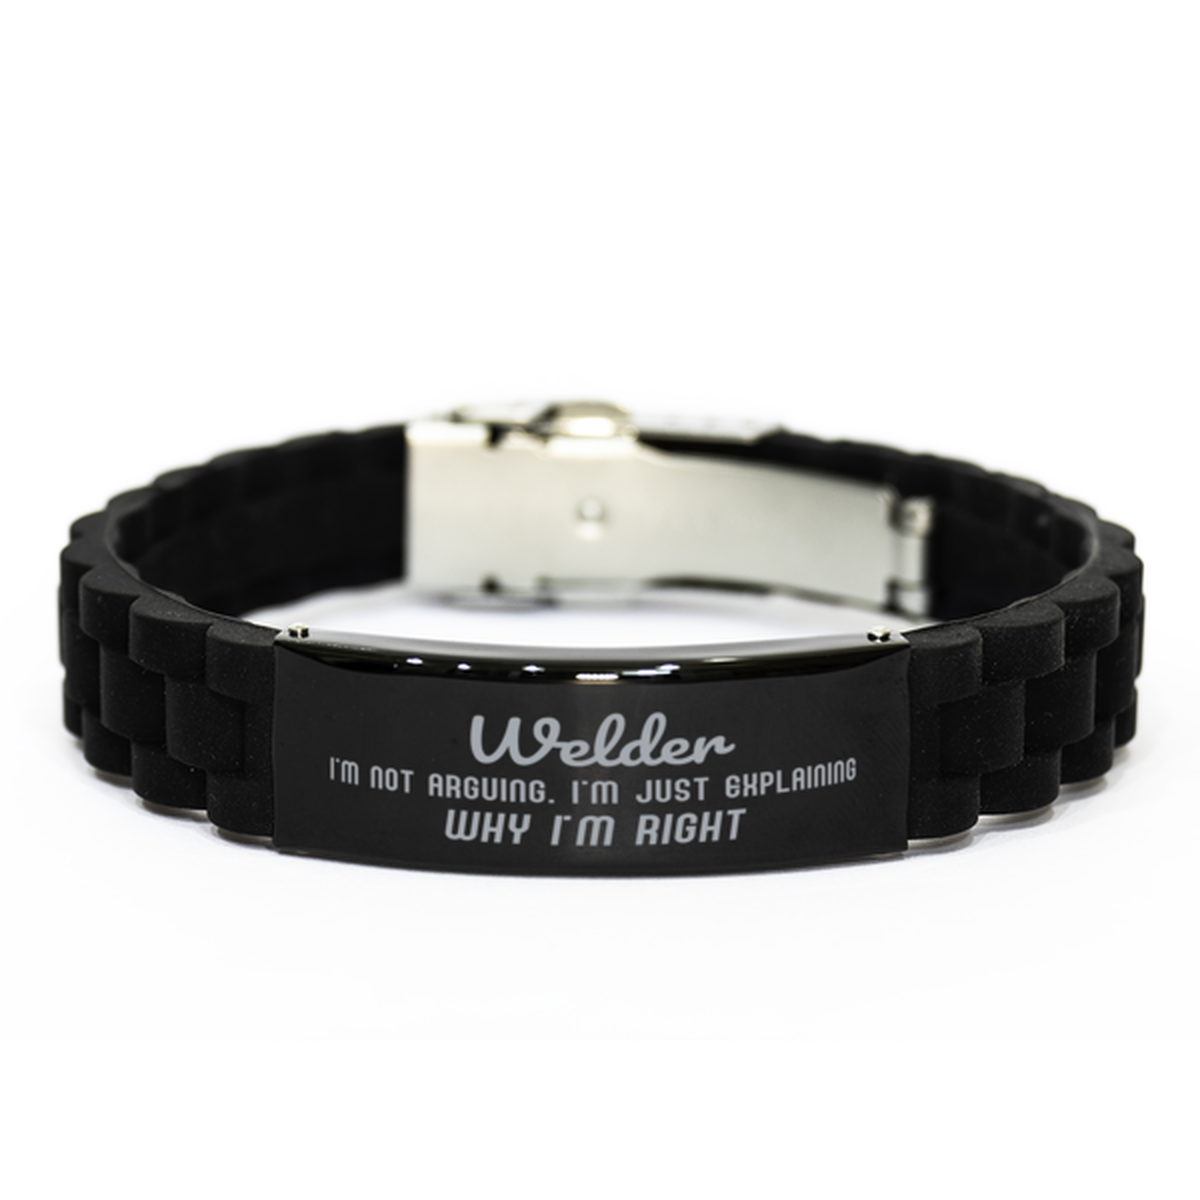 Welder I'm not Arguing. I'm Just Explaining Why I'm RIGHT Black Glidelock Clasp Bracelet, Funny Saying Quote Welder Gifts For Welder Graduation Birthday Christmas Gifts for Men Women Coworker